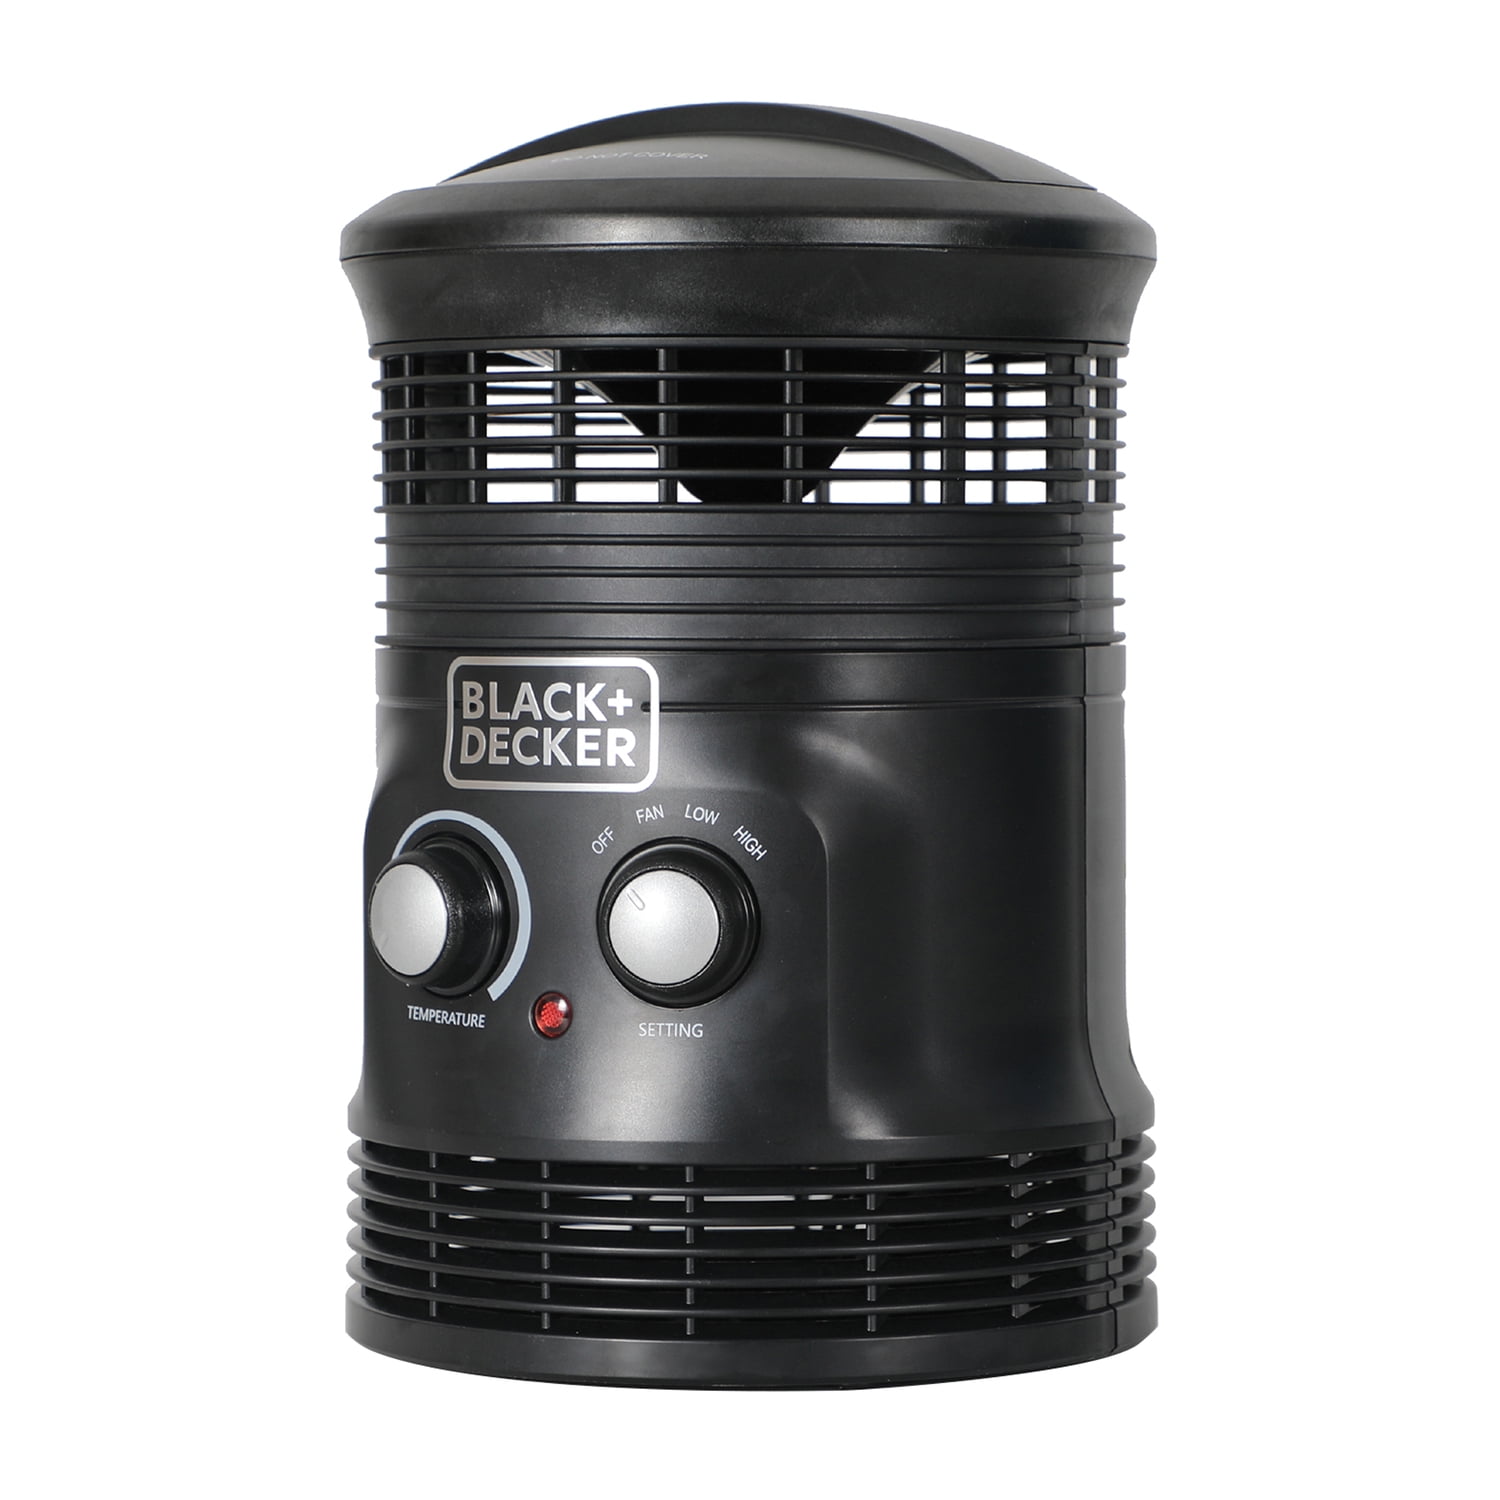 This Black + Decker Portable A/C Is 23% Off on